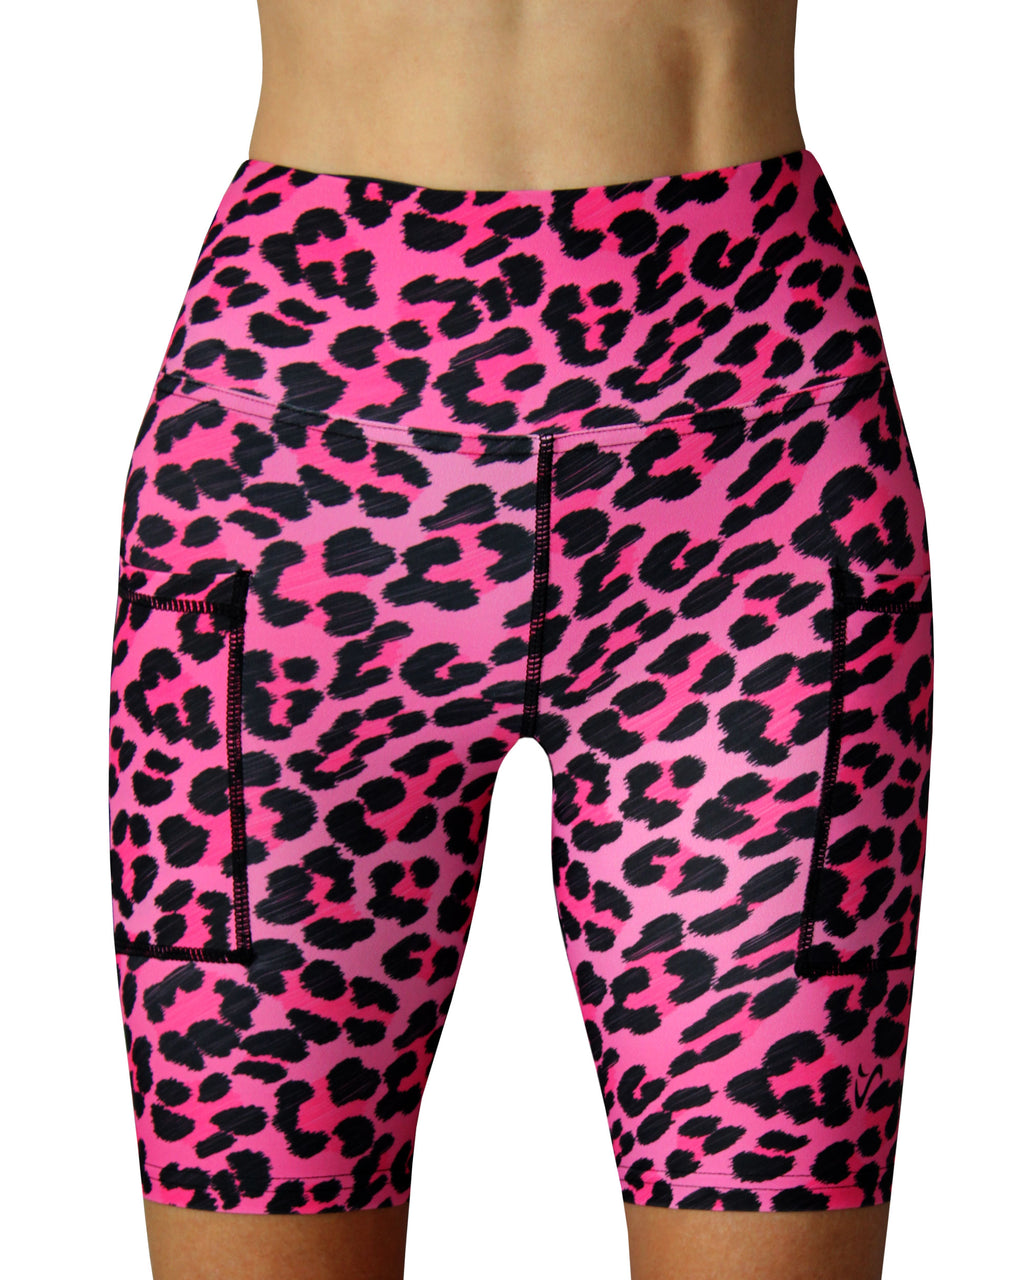 Vivolicious Women's funky pink leopard running and gym shorts, made in Cape Town, South Africa.